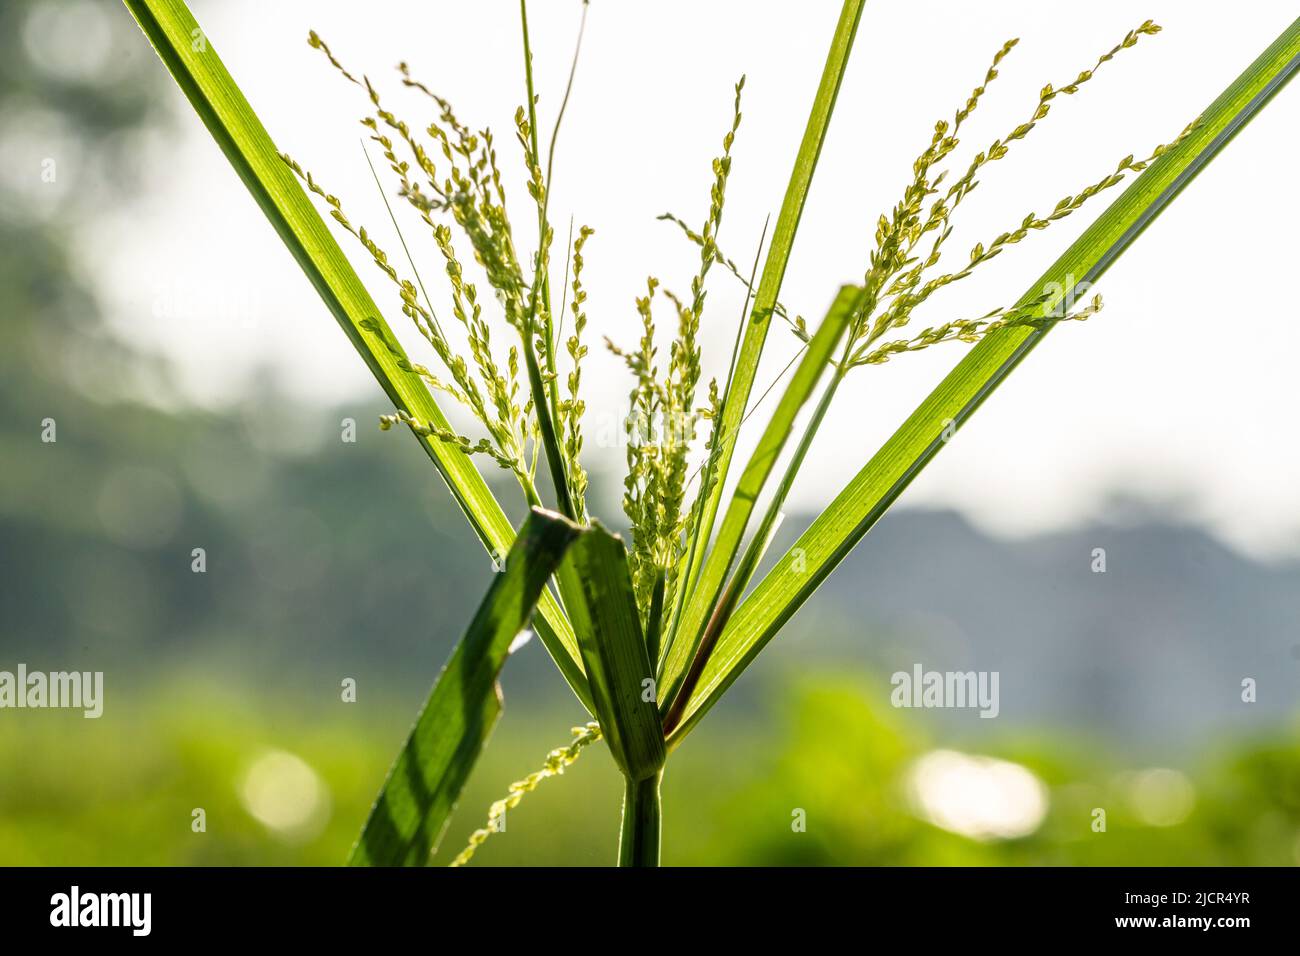 The weeds called Umbrella Sedge, long -leafy green, are flowering, in a bright morning Stock Photo